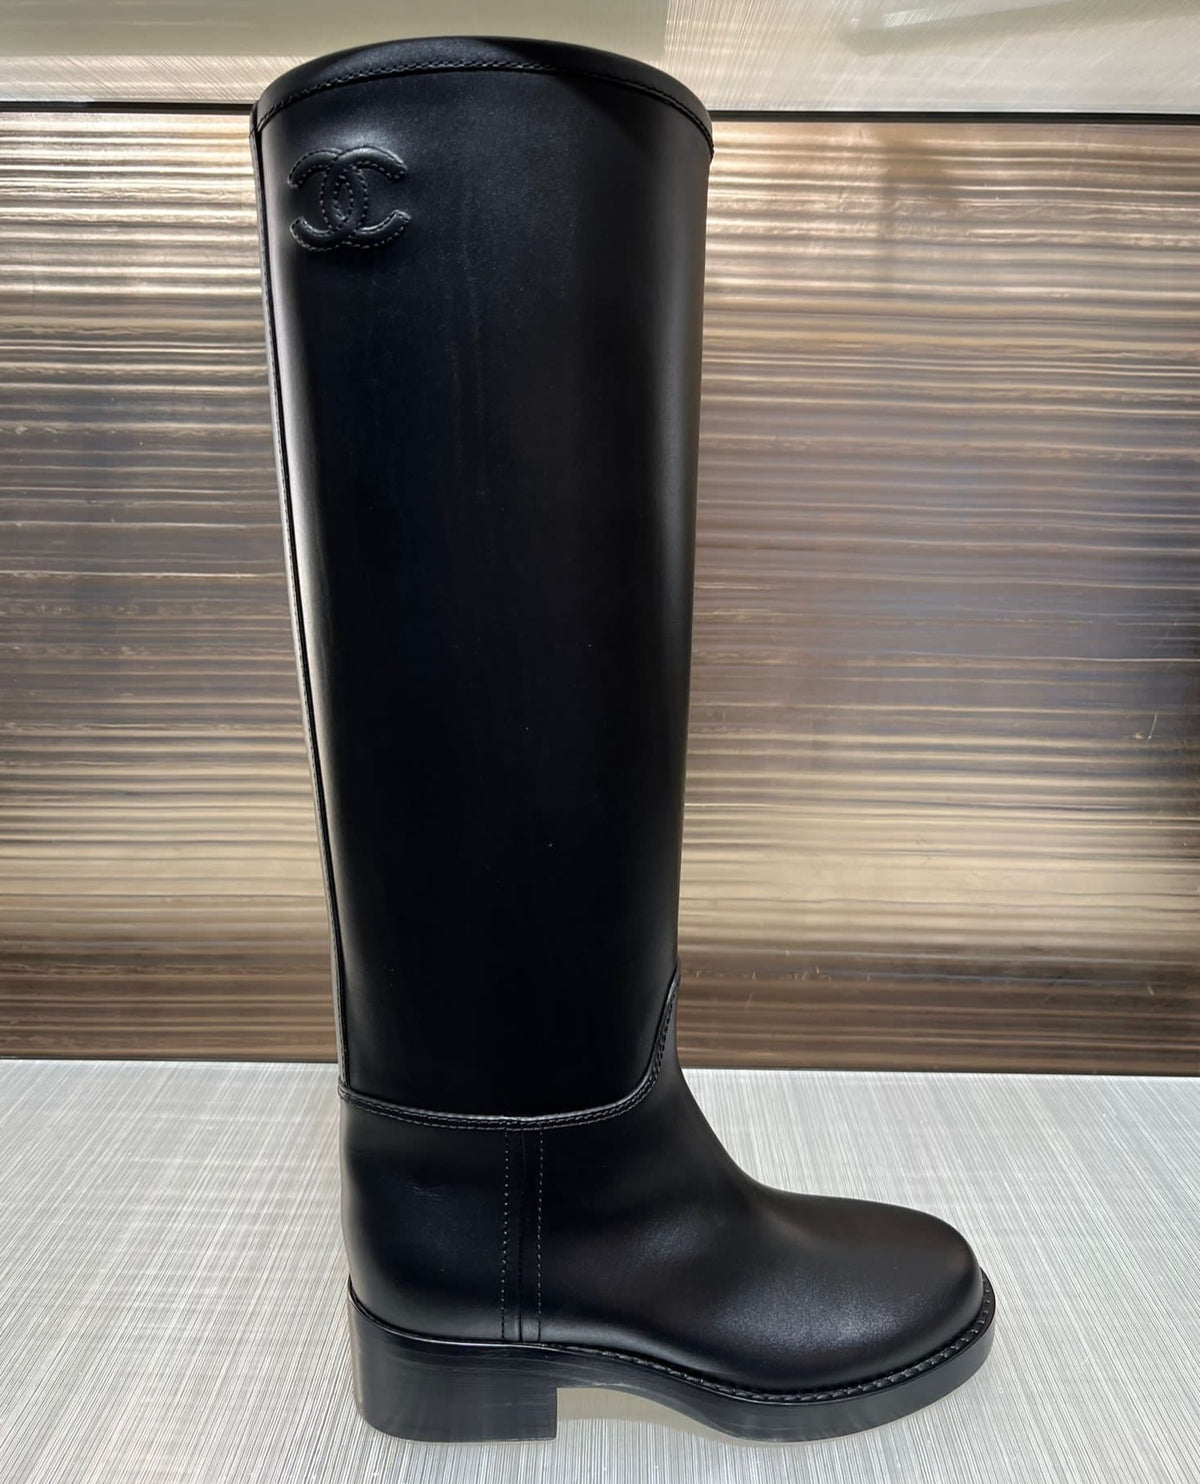 CHANEL Fall-Winter 22/23 black high boots – hey it's personal